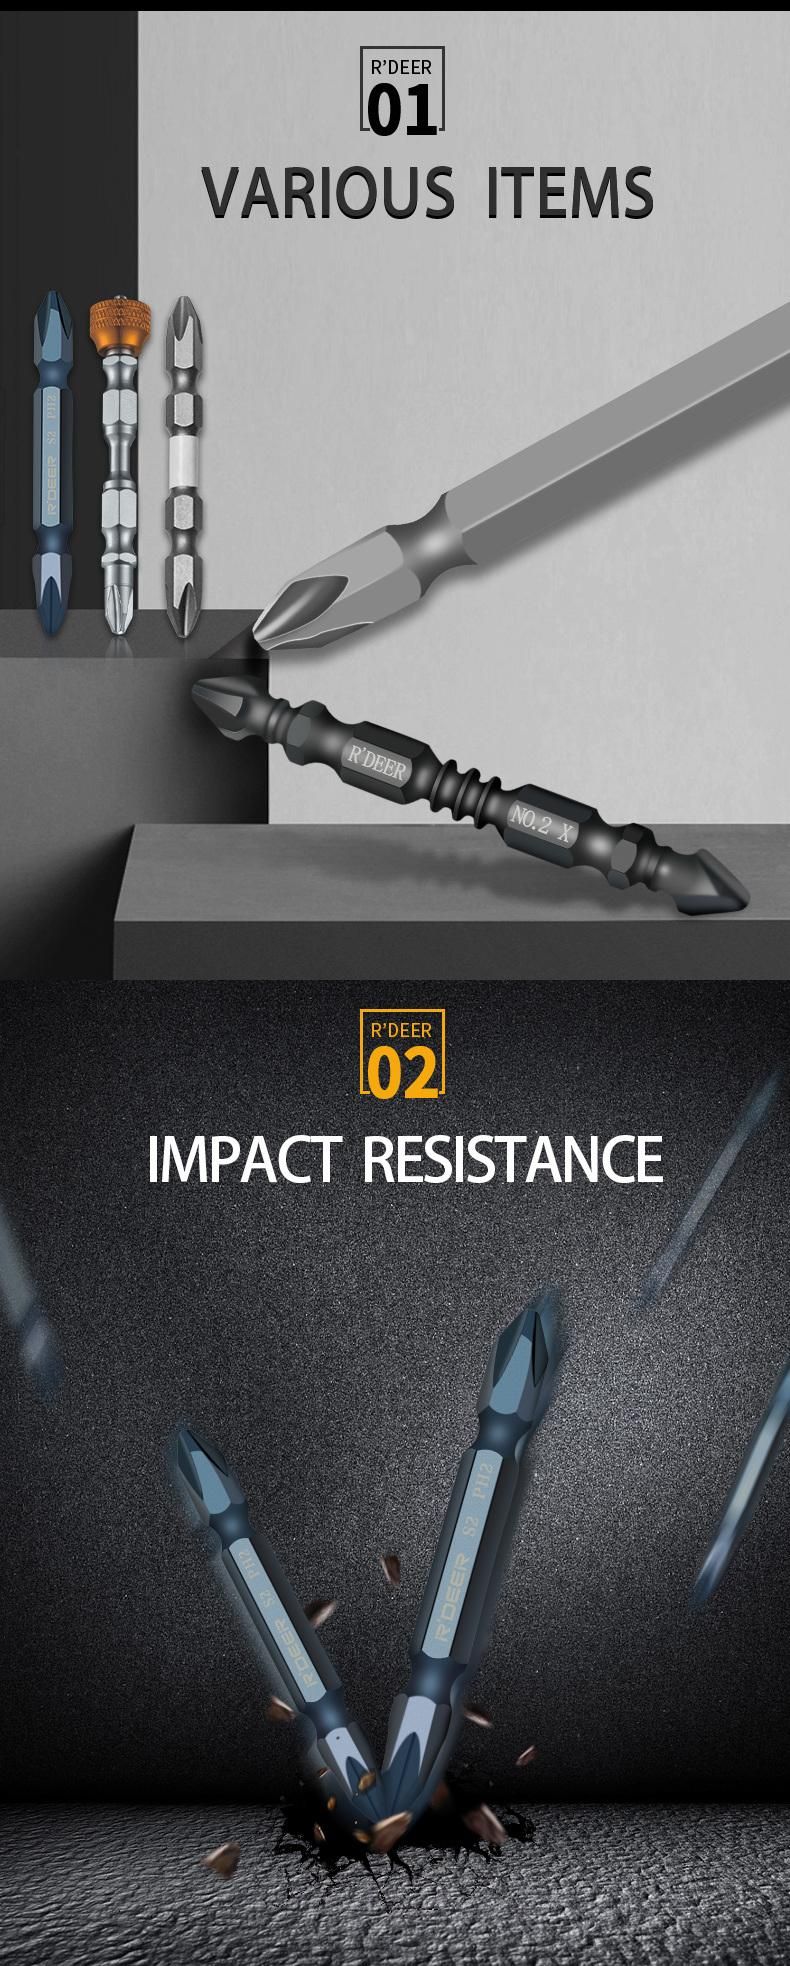 Impact Resistance Screwdriver Bit Set for Industrial Use